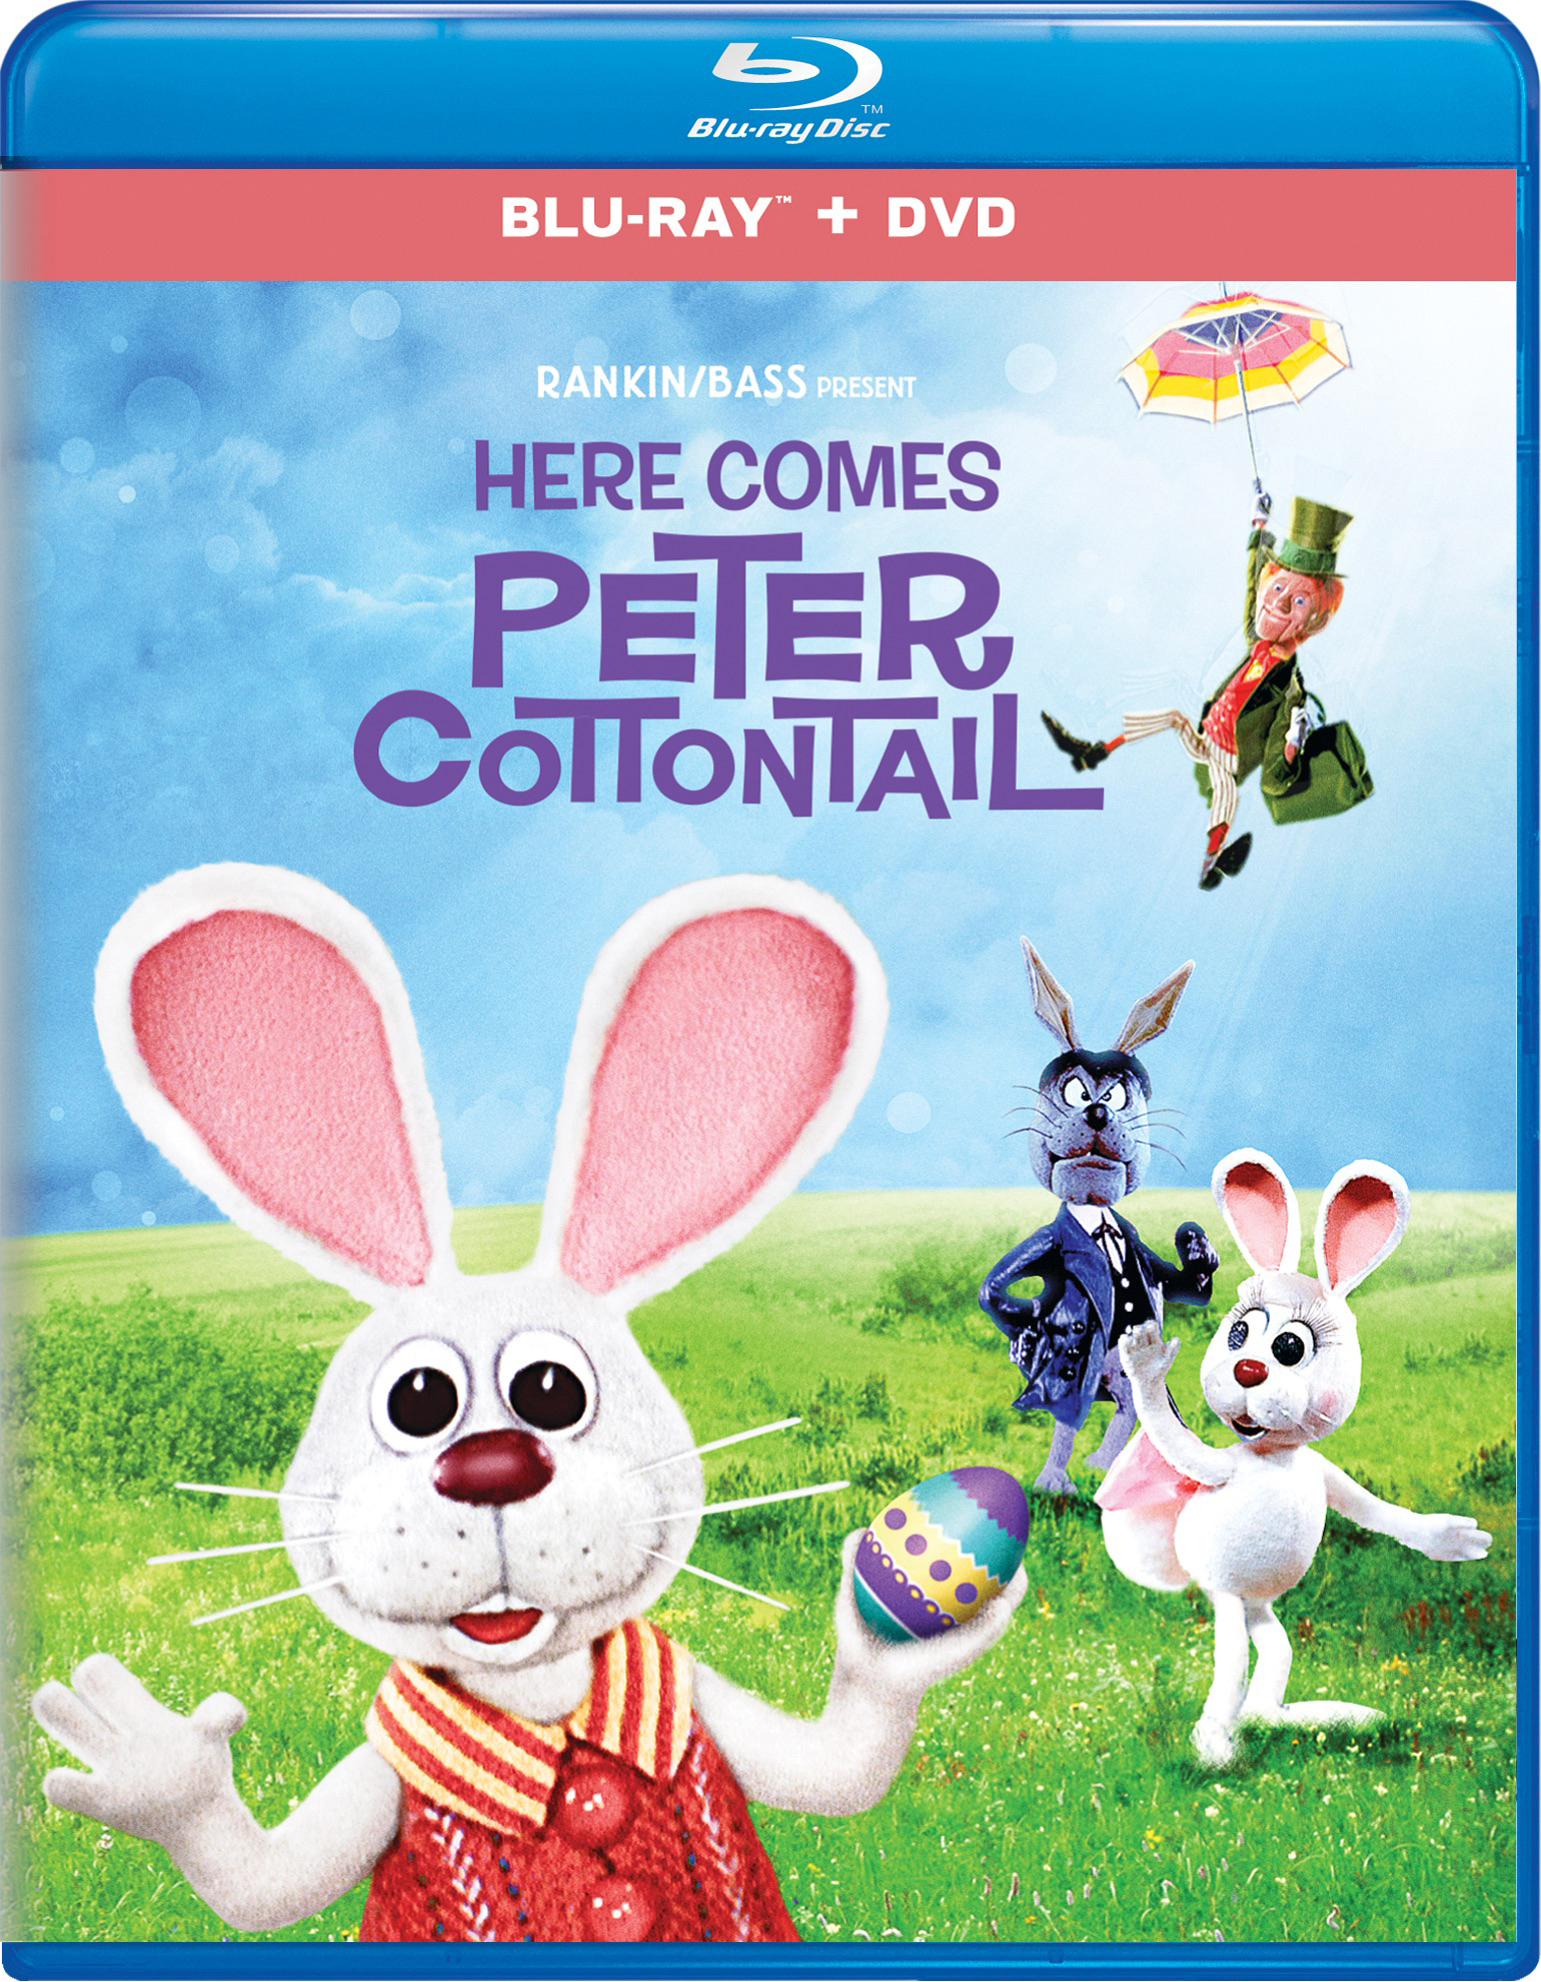 Here Comes Peter Cottontail (with DVD) - Blu-ray   - Modern Classic Movies On Blu-ray - Movies On GRUV